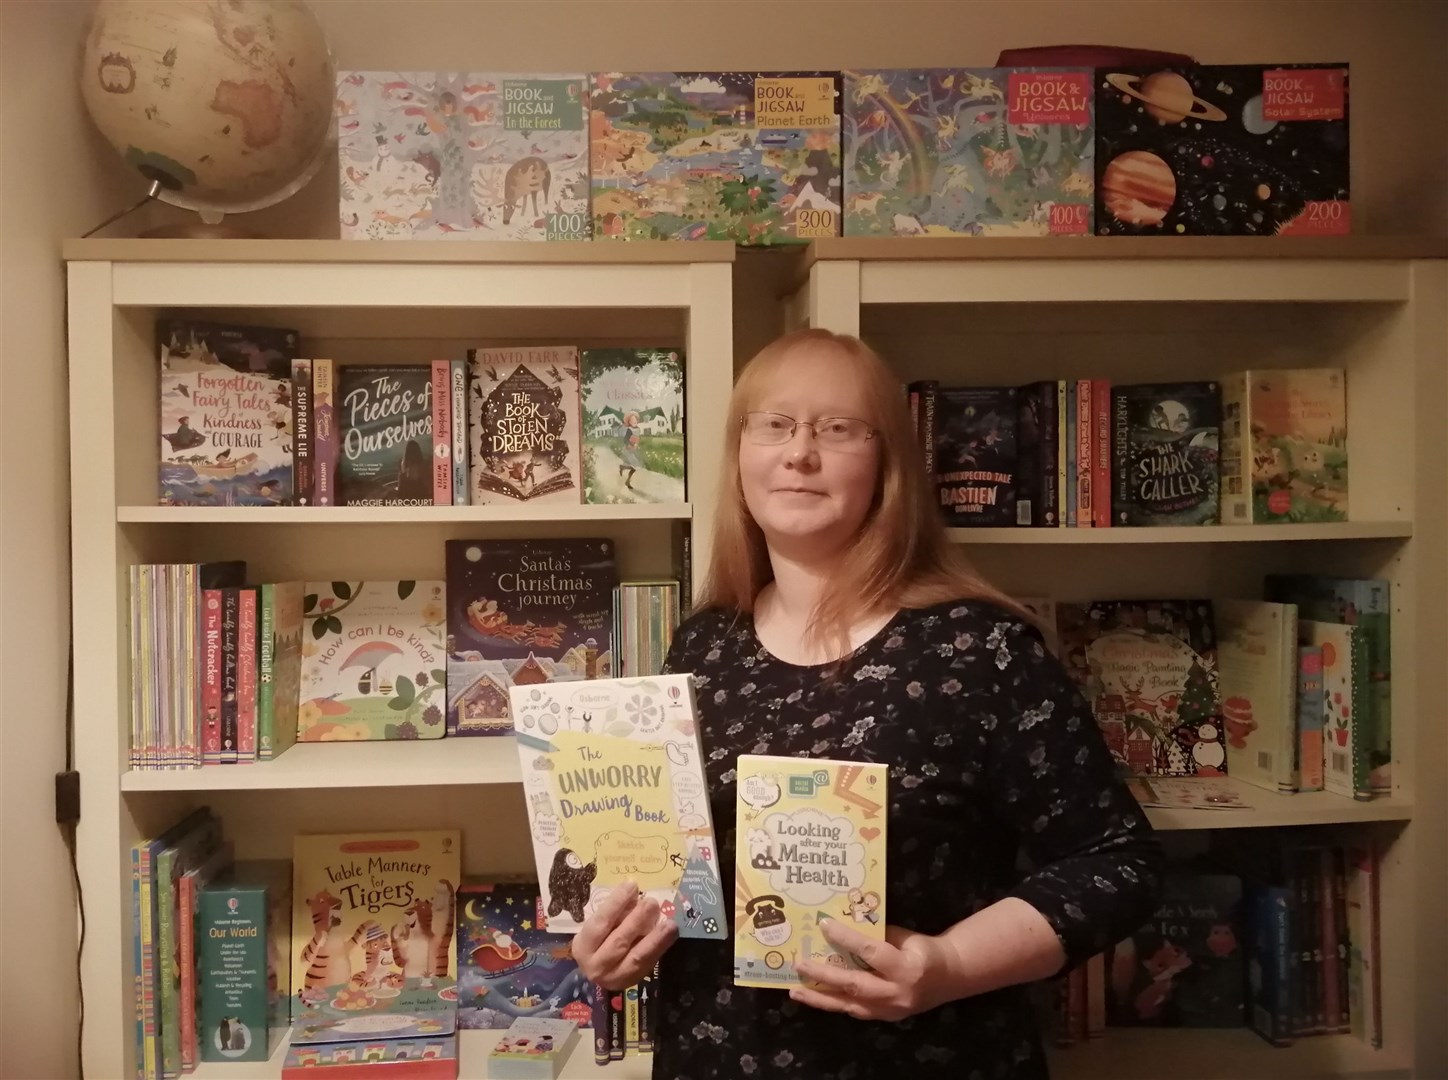 Sarah Coulson, from Forres, has launched a fundraiser to provide Moray Women's Aid with books and games this Christmas.